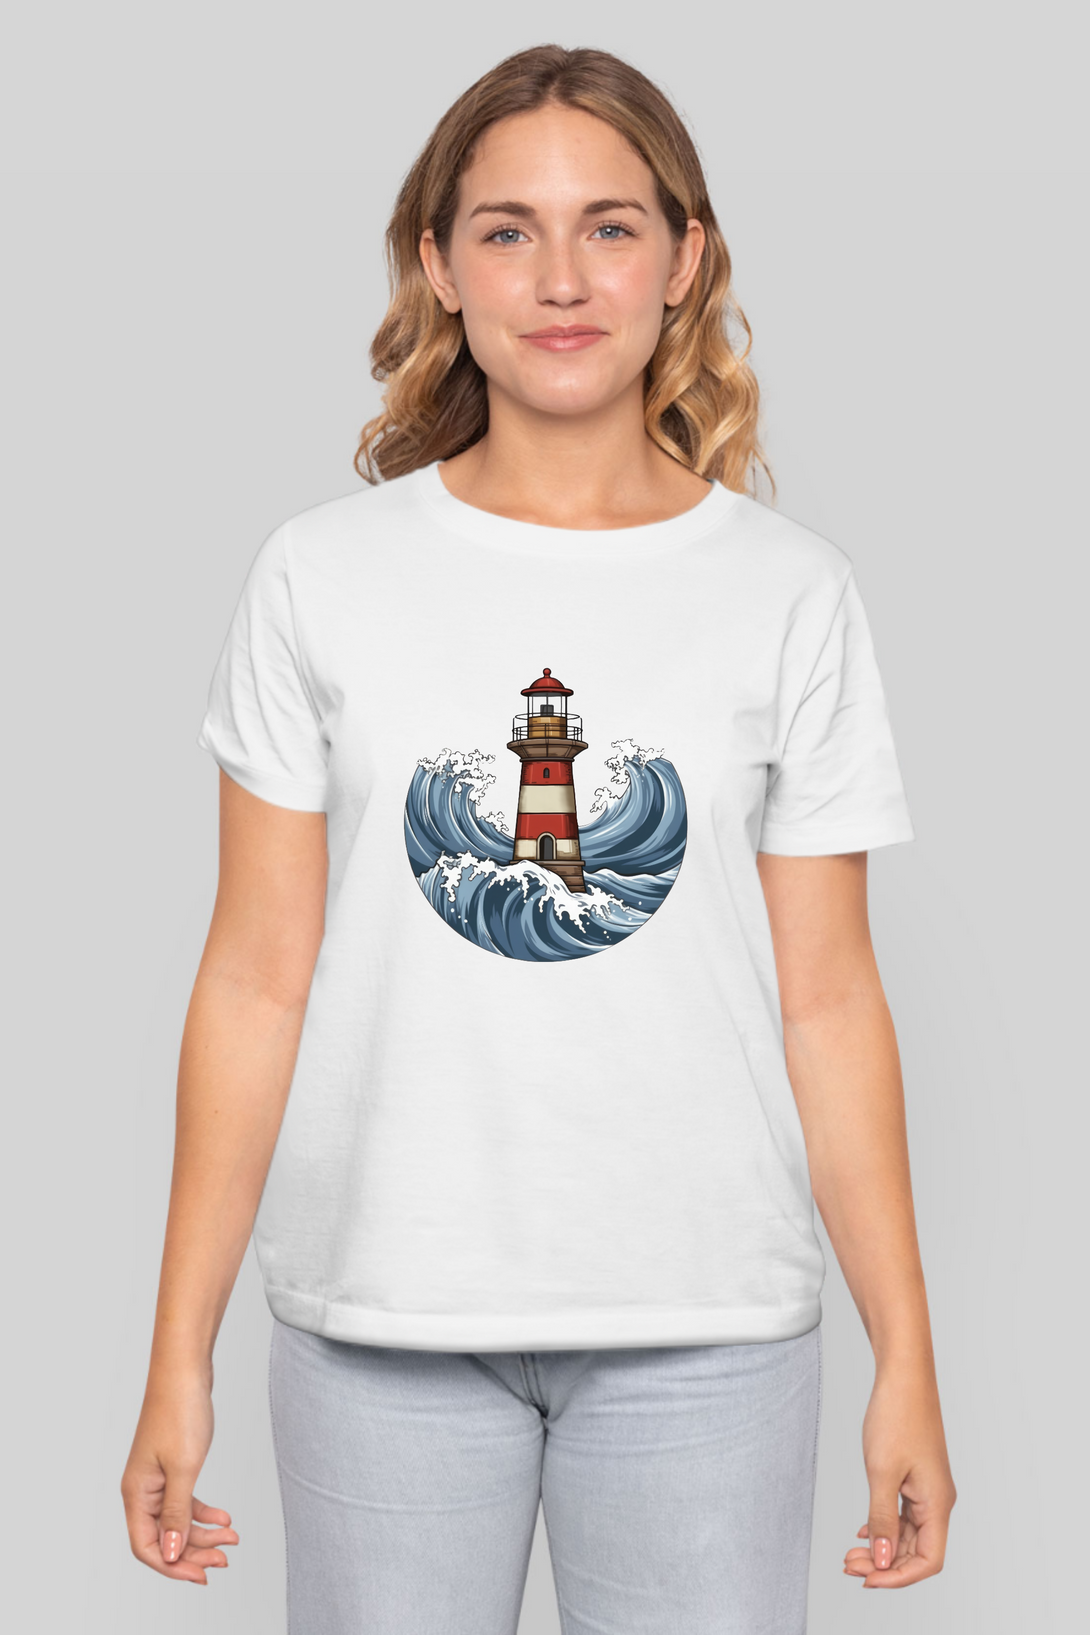 Lighthouse And Waves Printed T-Shirt For Women - WowWaves - 10